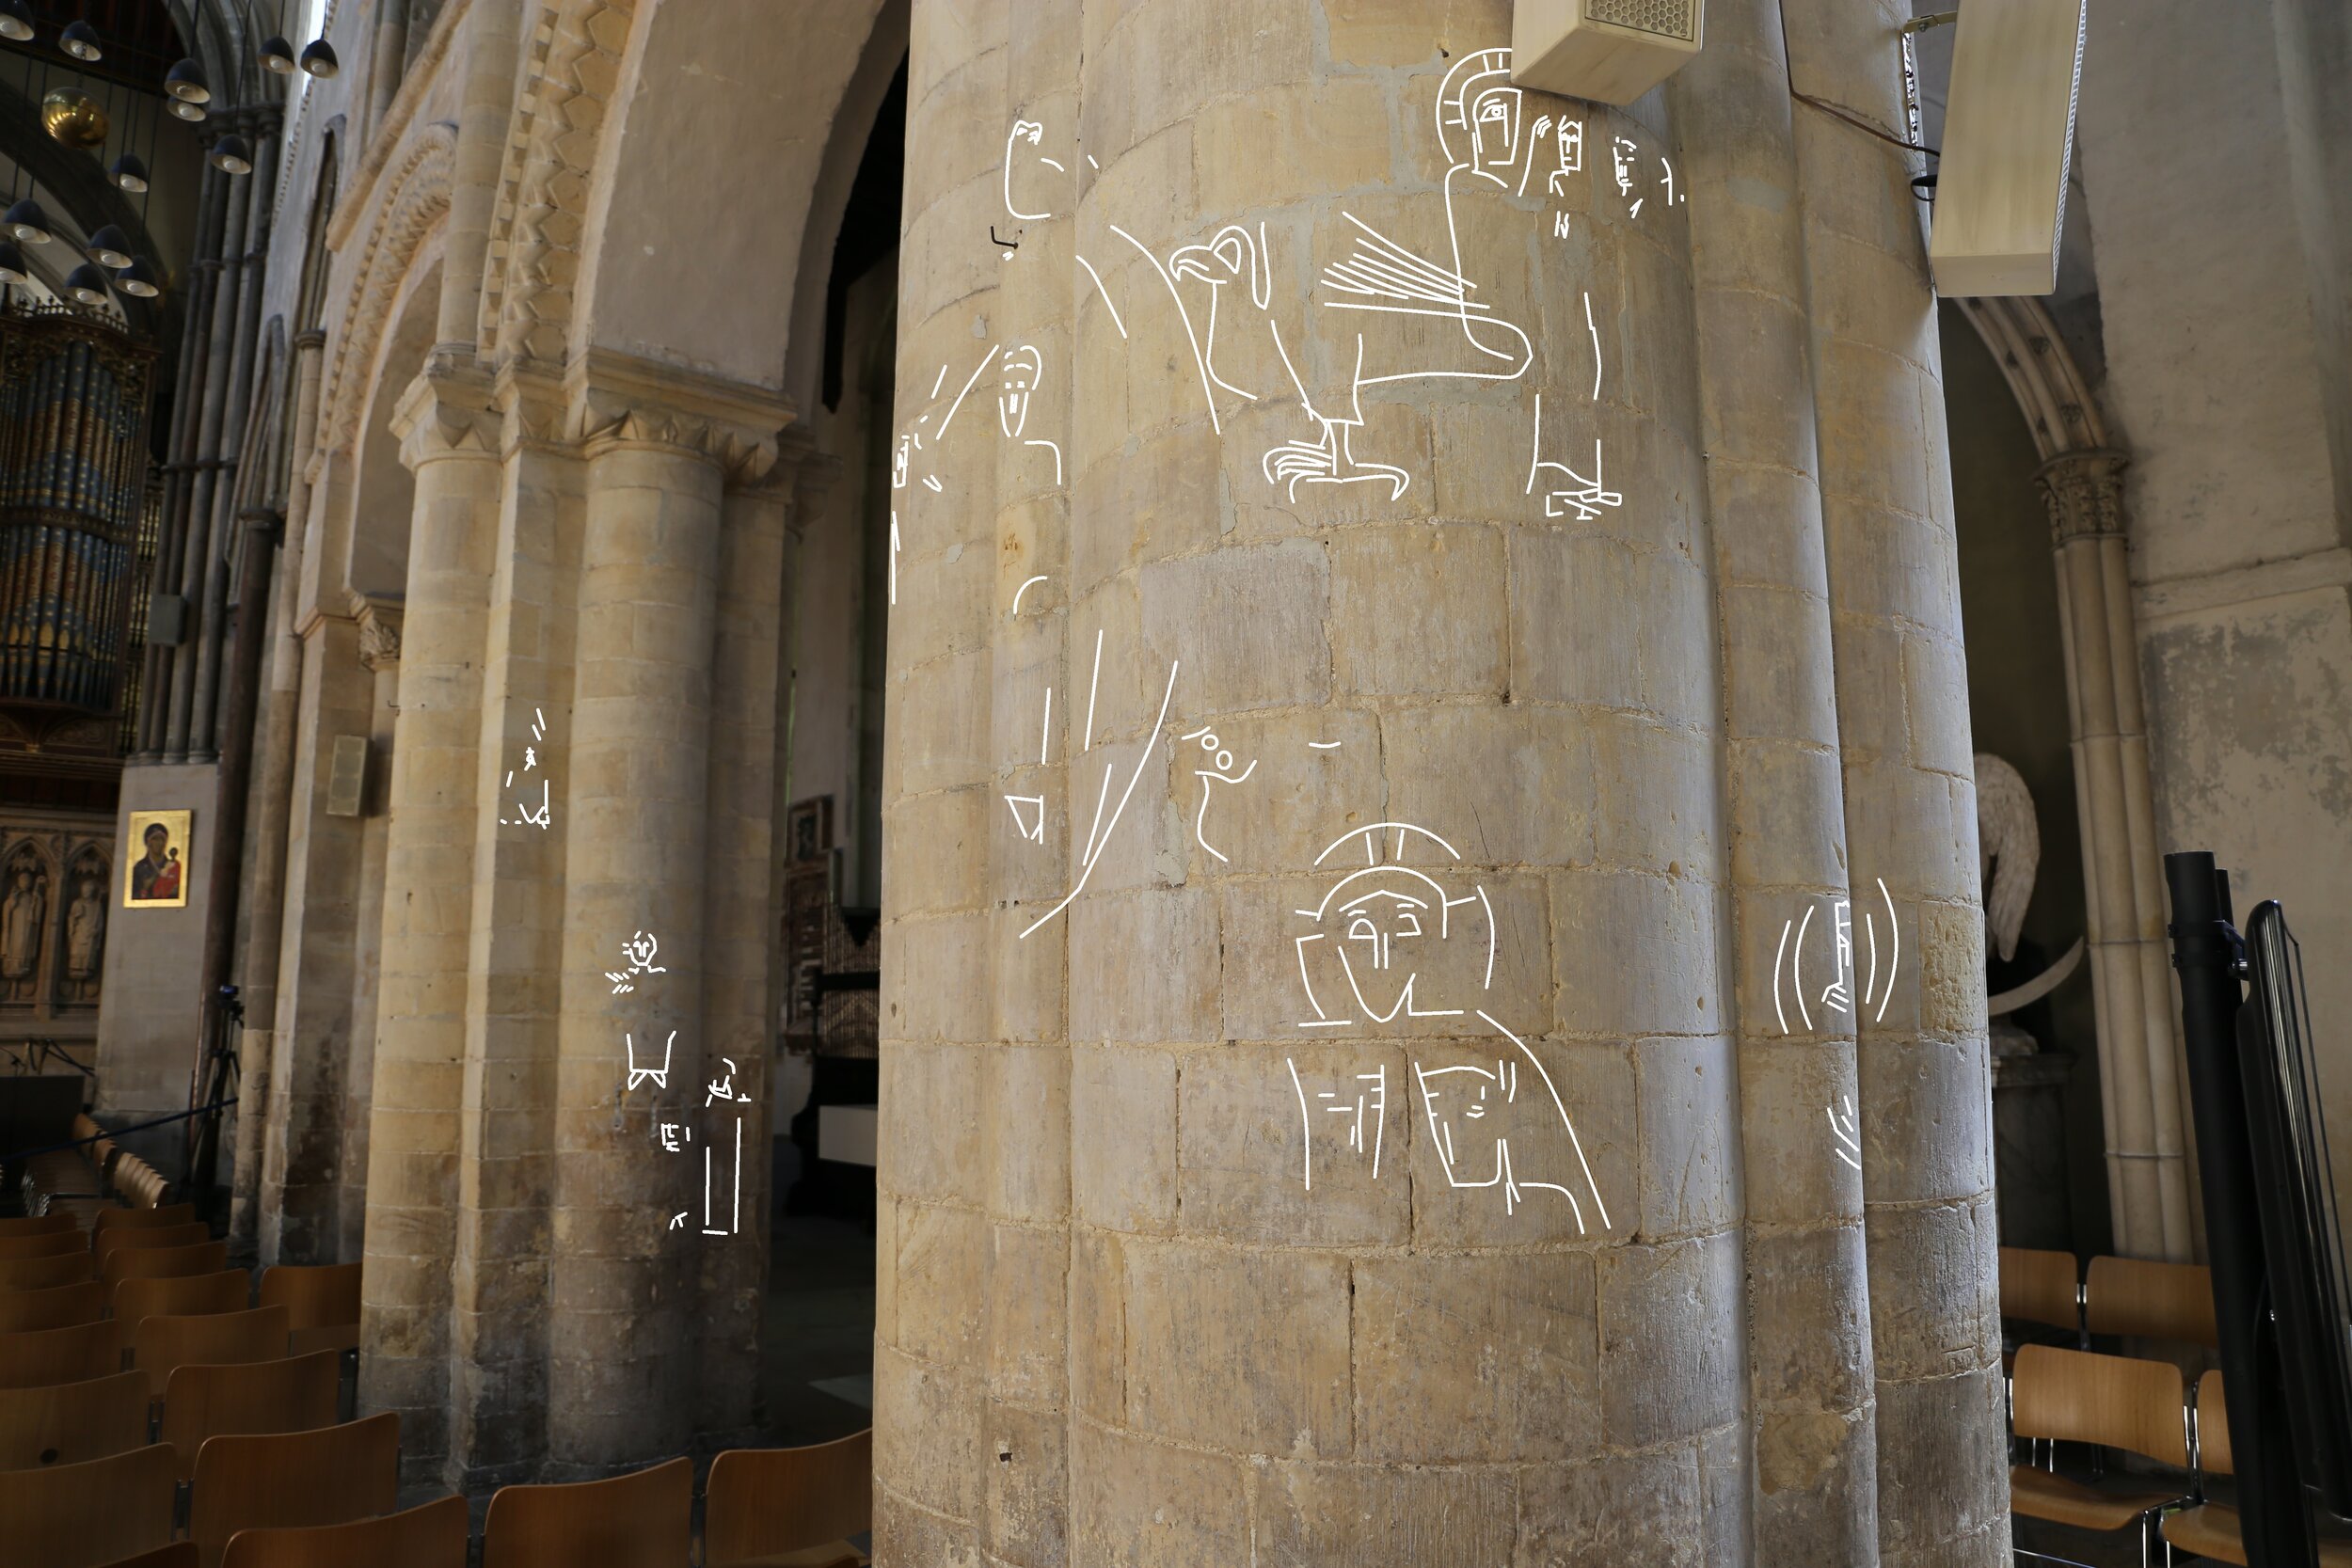 Digital trace of c.1200 AD artists' sketches on a pier in the south nave arcade.